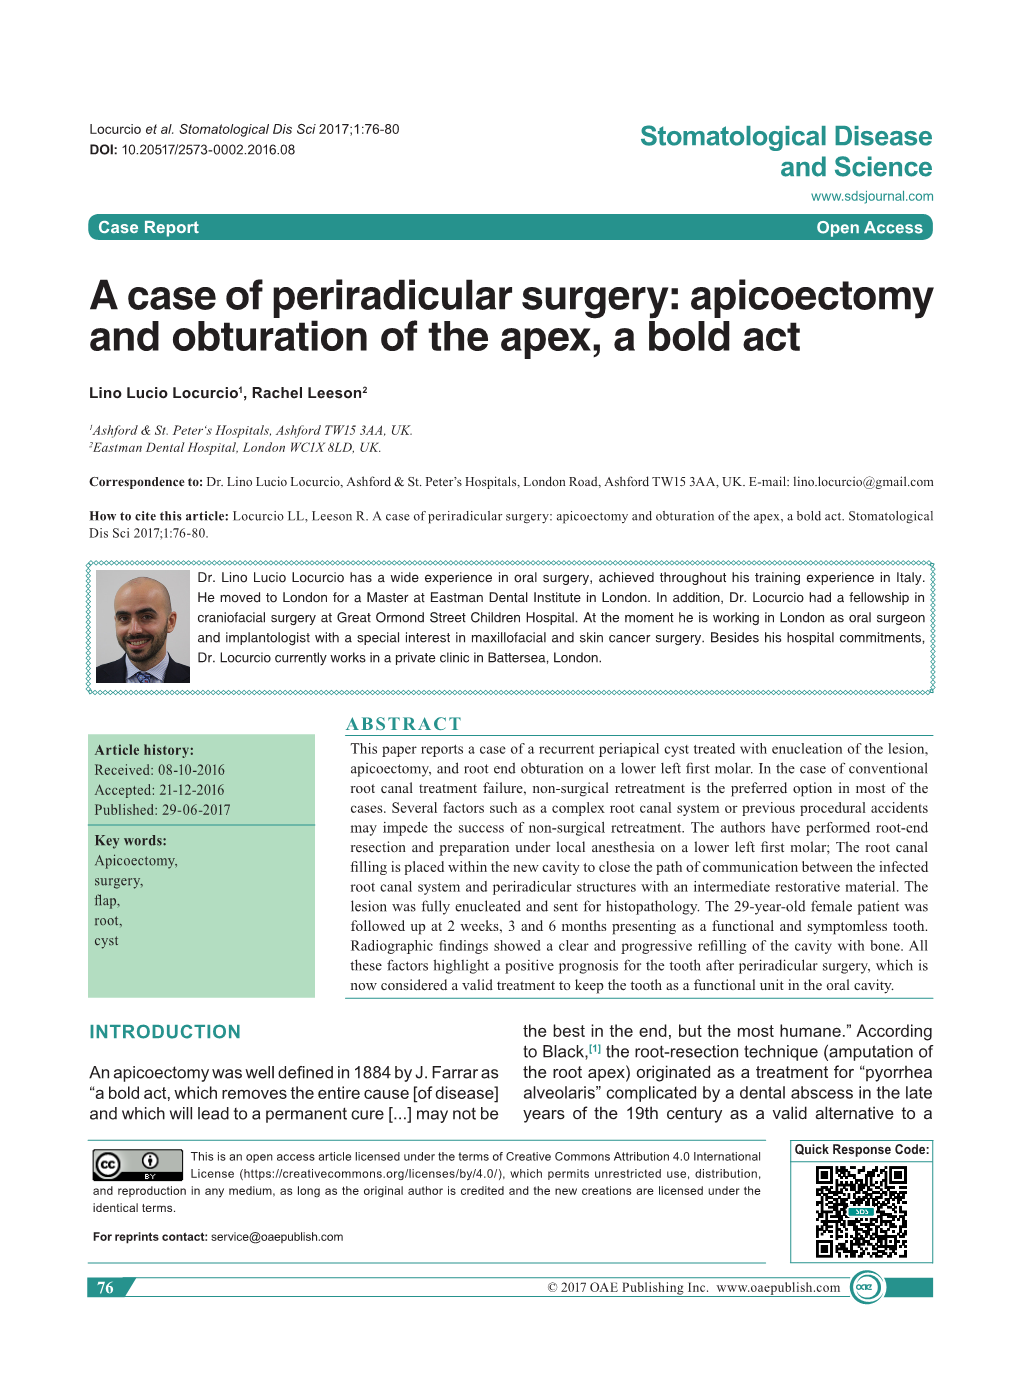 A Case of Periradicular Surgery: Apicoectomy and Obturation of the Apex, a Bold Act